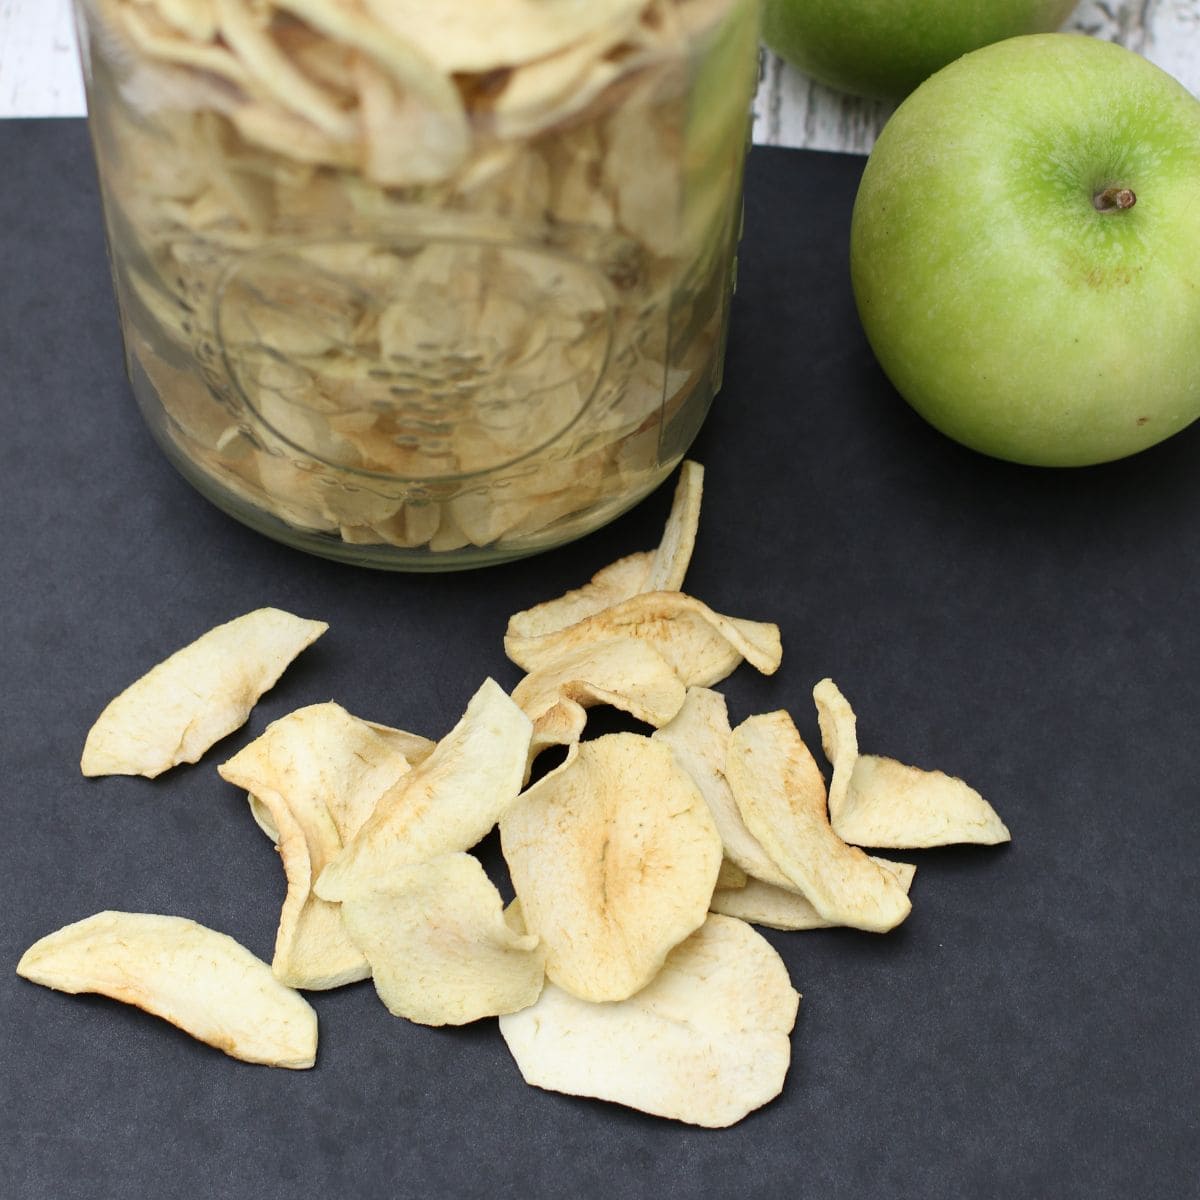 dried apple slices on a black background.